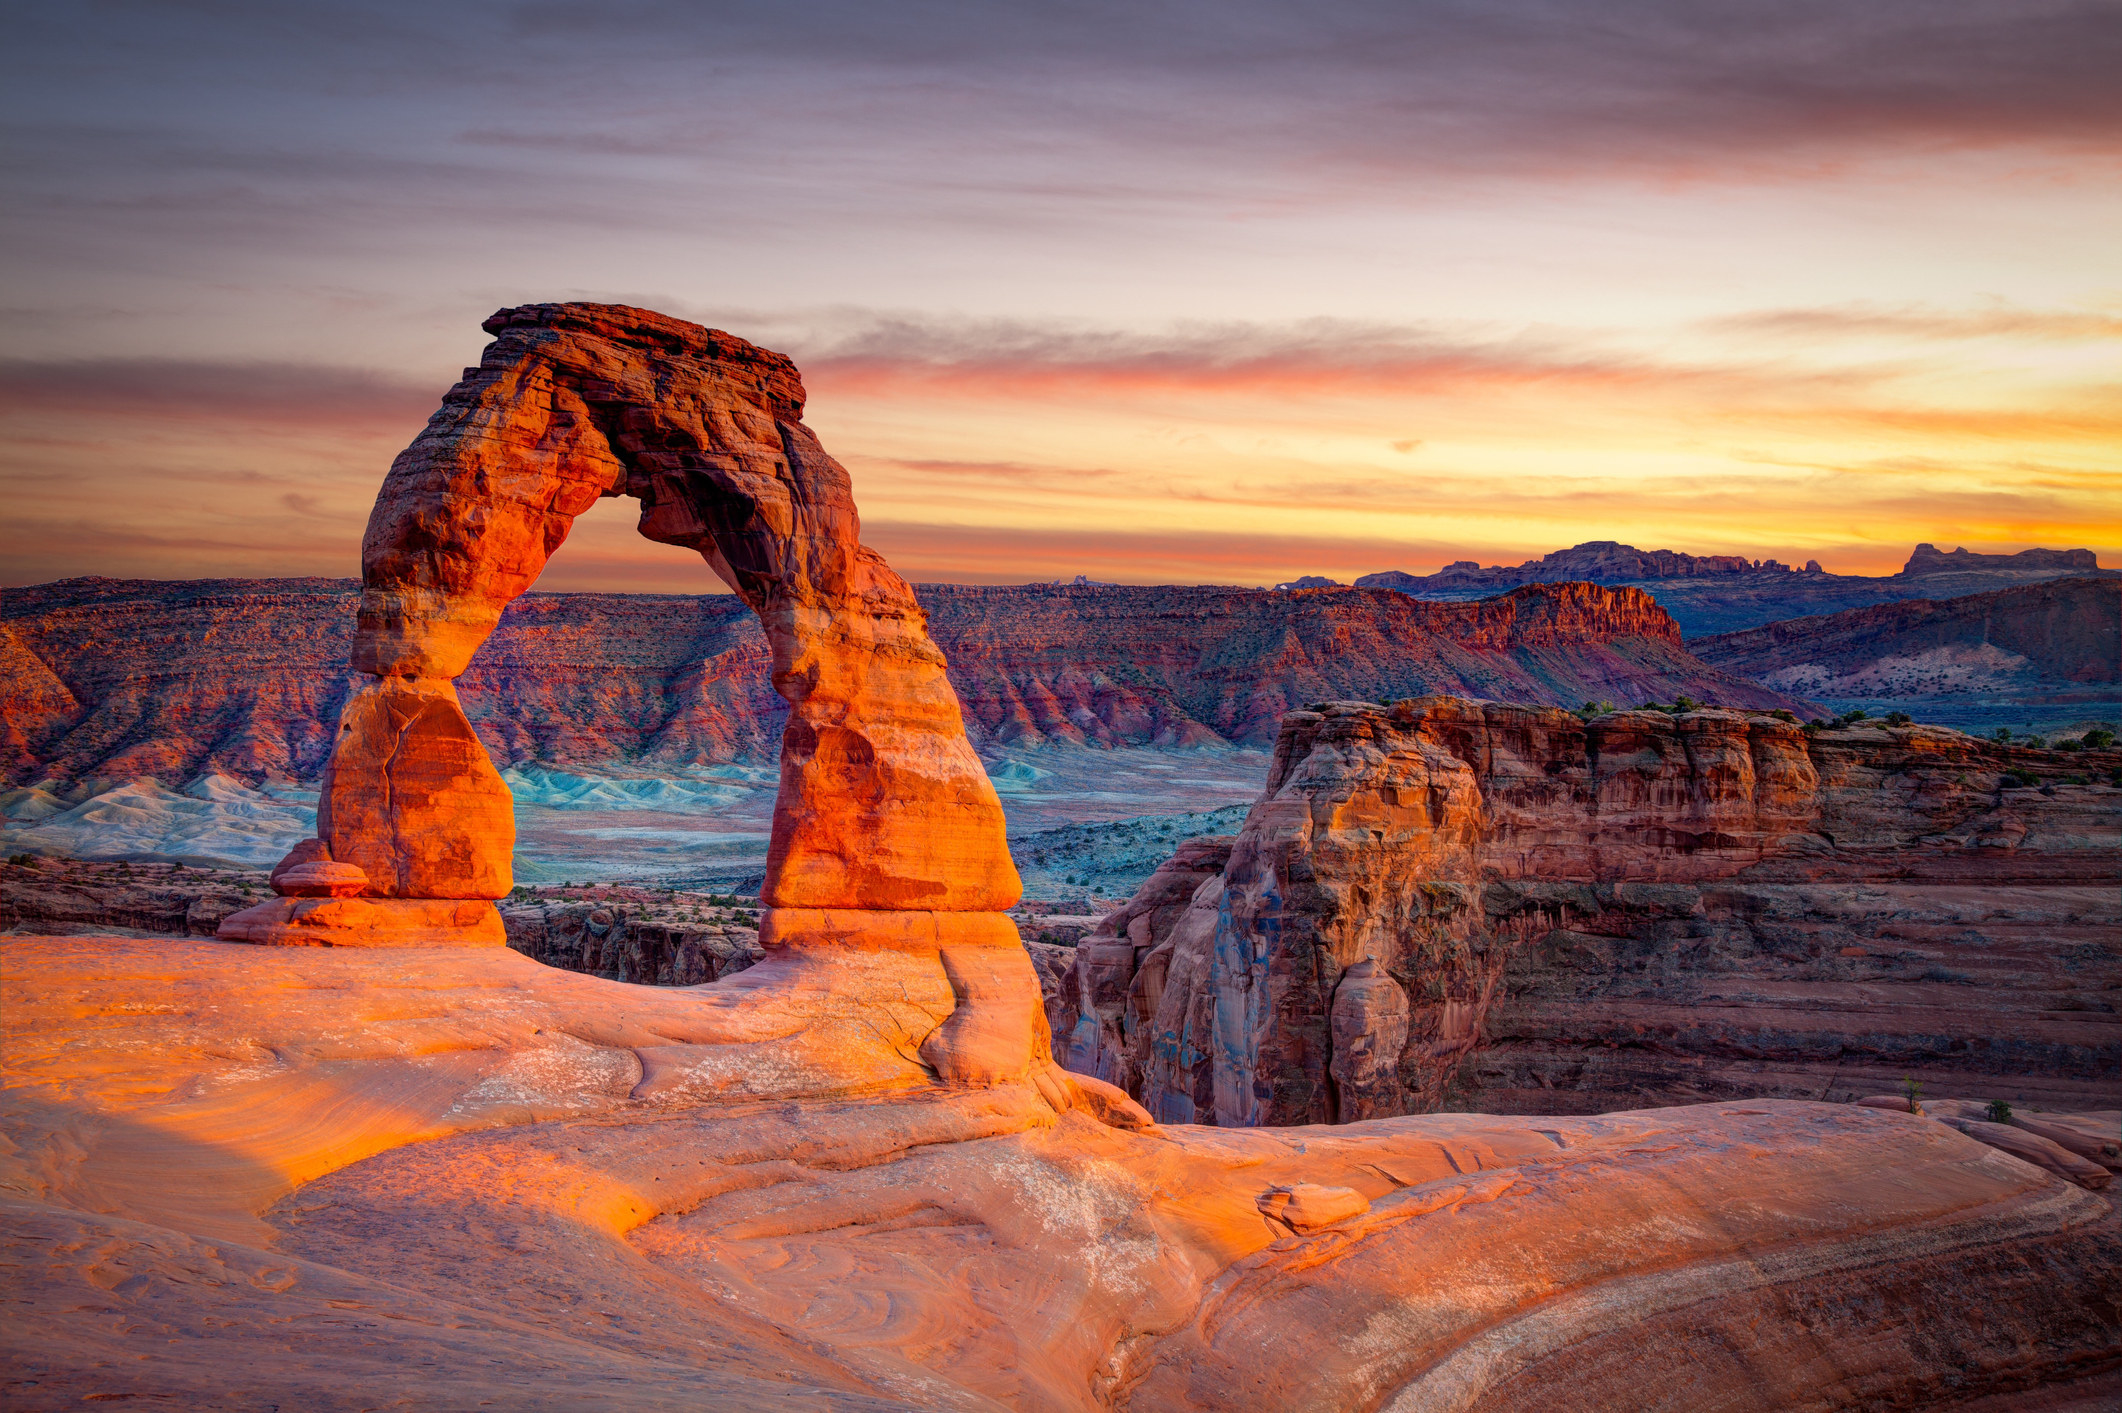 A sunset view of Arches National Park in Utah